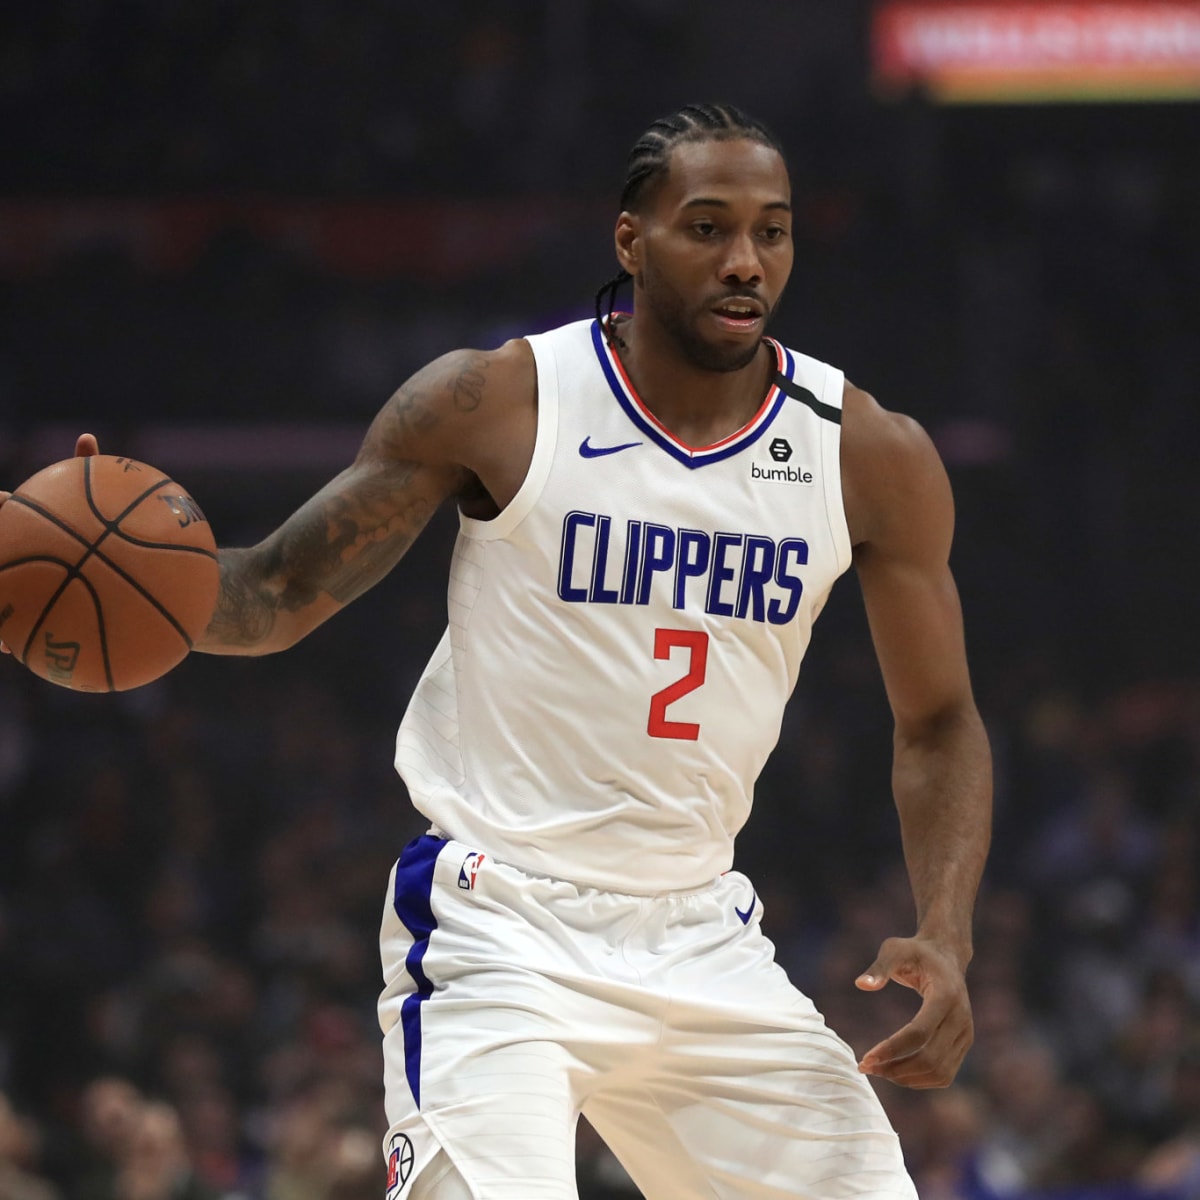 Kawhi Leonard practises with LA Clippers for first time inside NBA bubble, NBA News